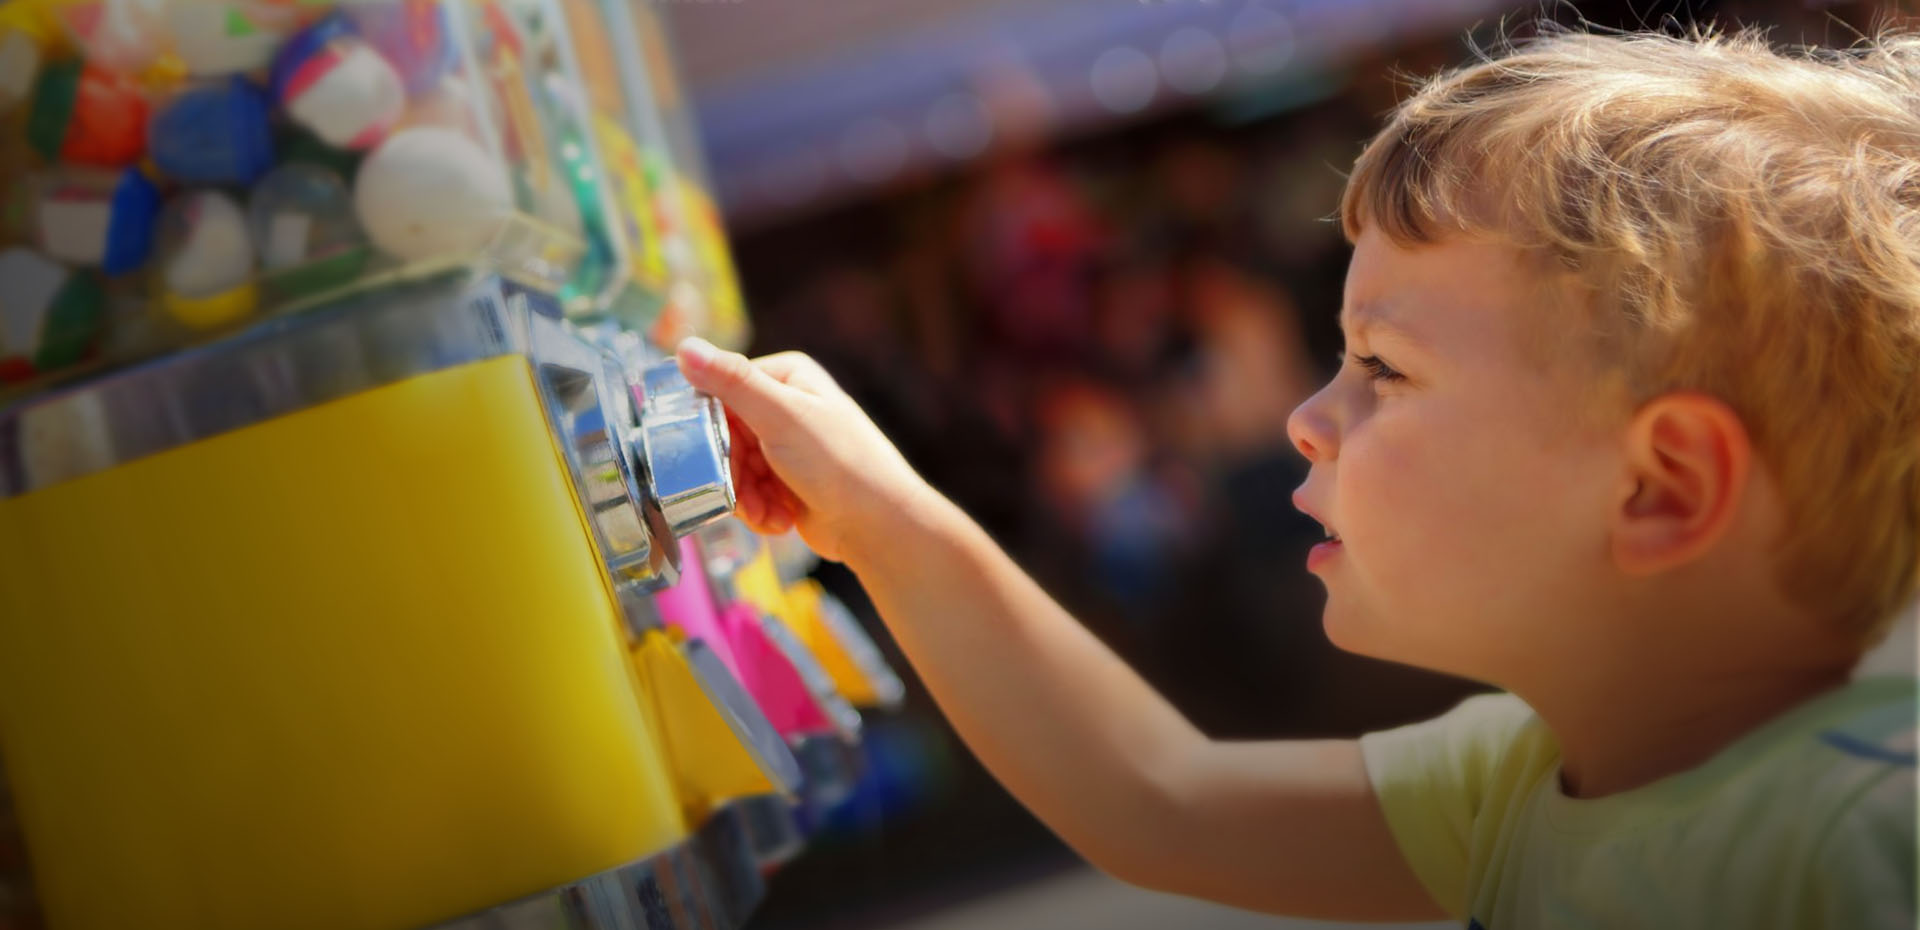 Installers Of Toys Vending Machines For Soft Play Businesses Peterborough